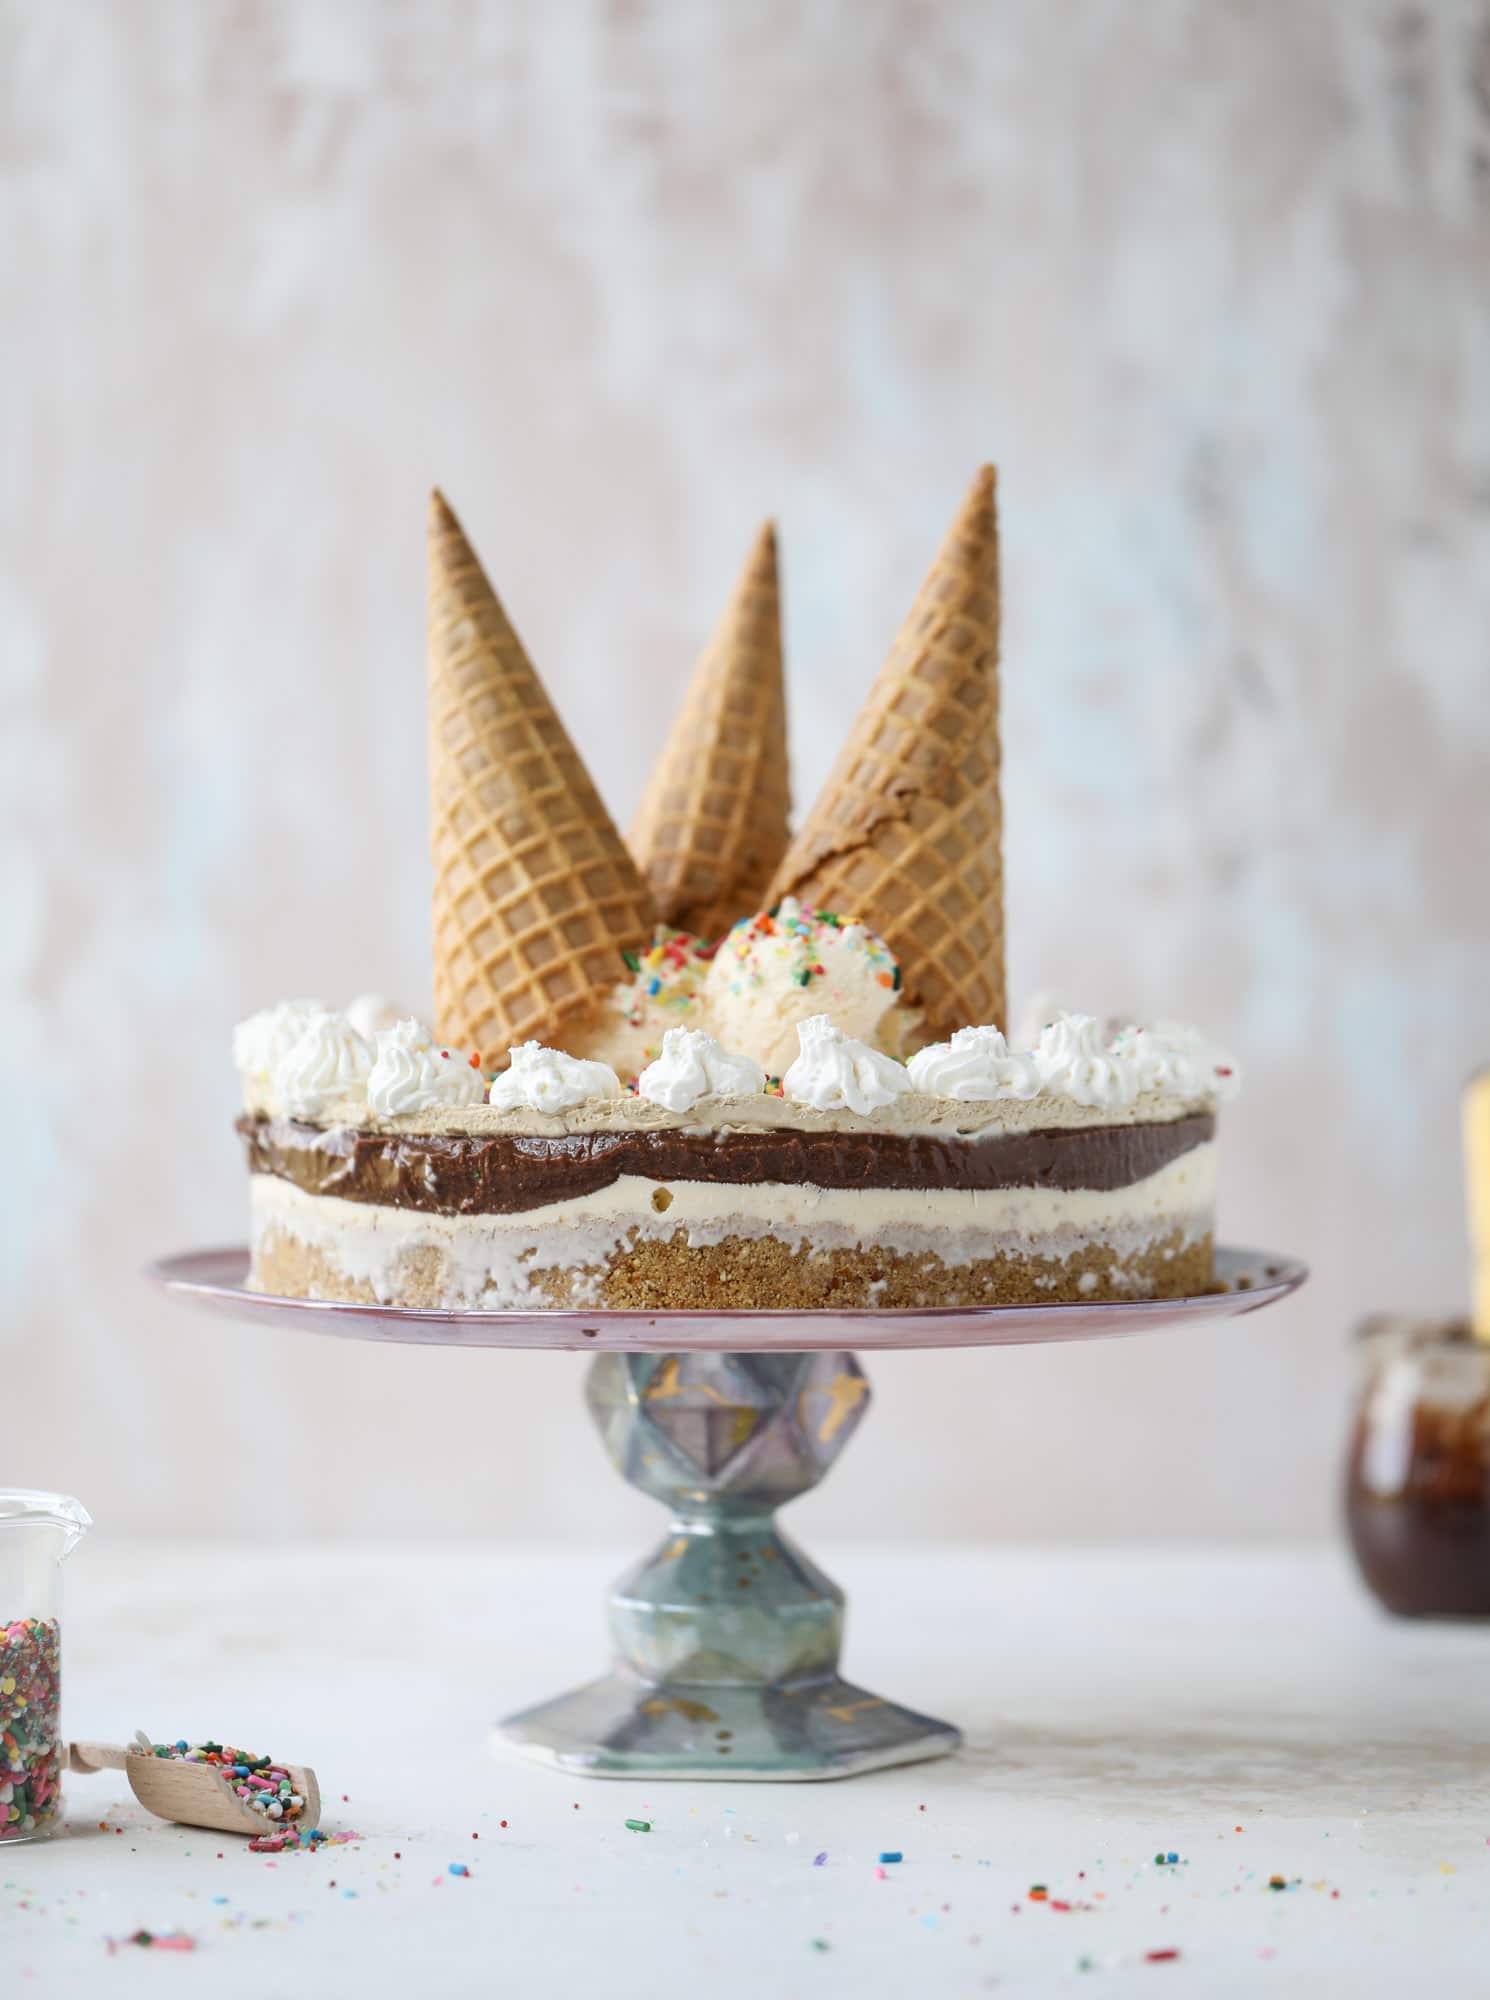 This peanut butter fudge ice cream cake is absolutely insane and perfect for summer! A sweet and savory pretzel crust, vanilla ice cream, homemade hot fudge and a peanut butter whipped cream layer take it to the next LEVEL. Delicious! I howsweeteats.com #icecream #cake #peanutbutter #chocolate #pretzel